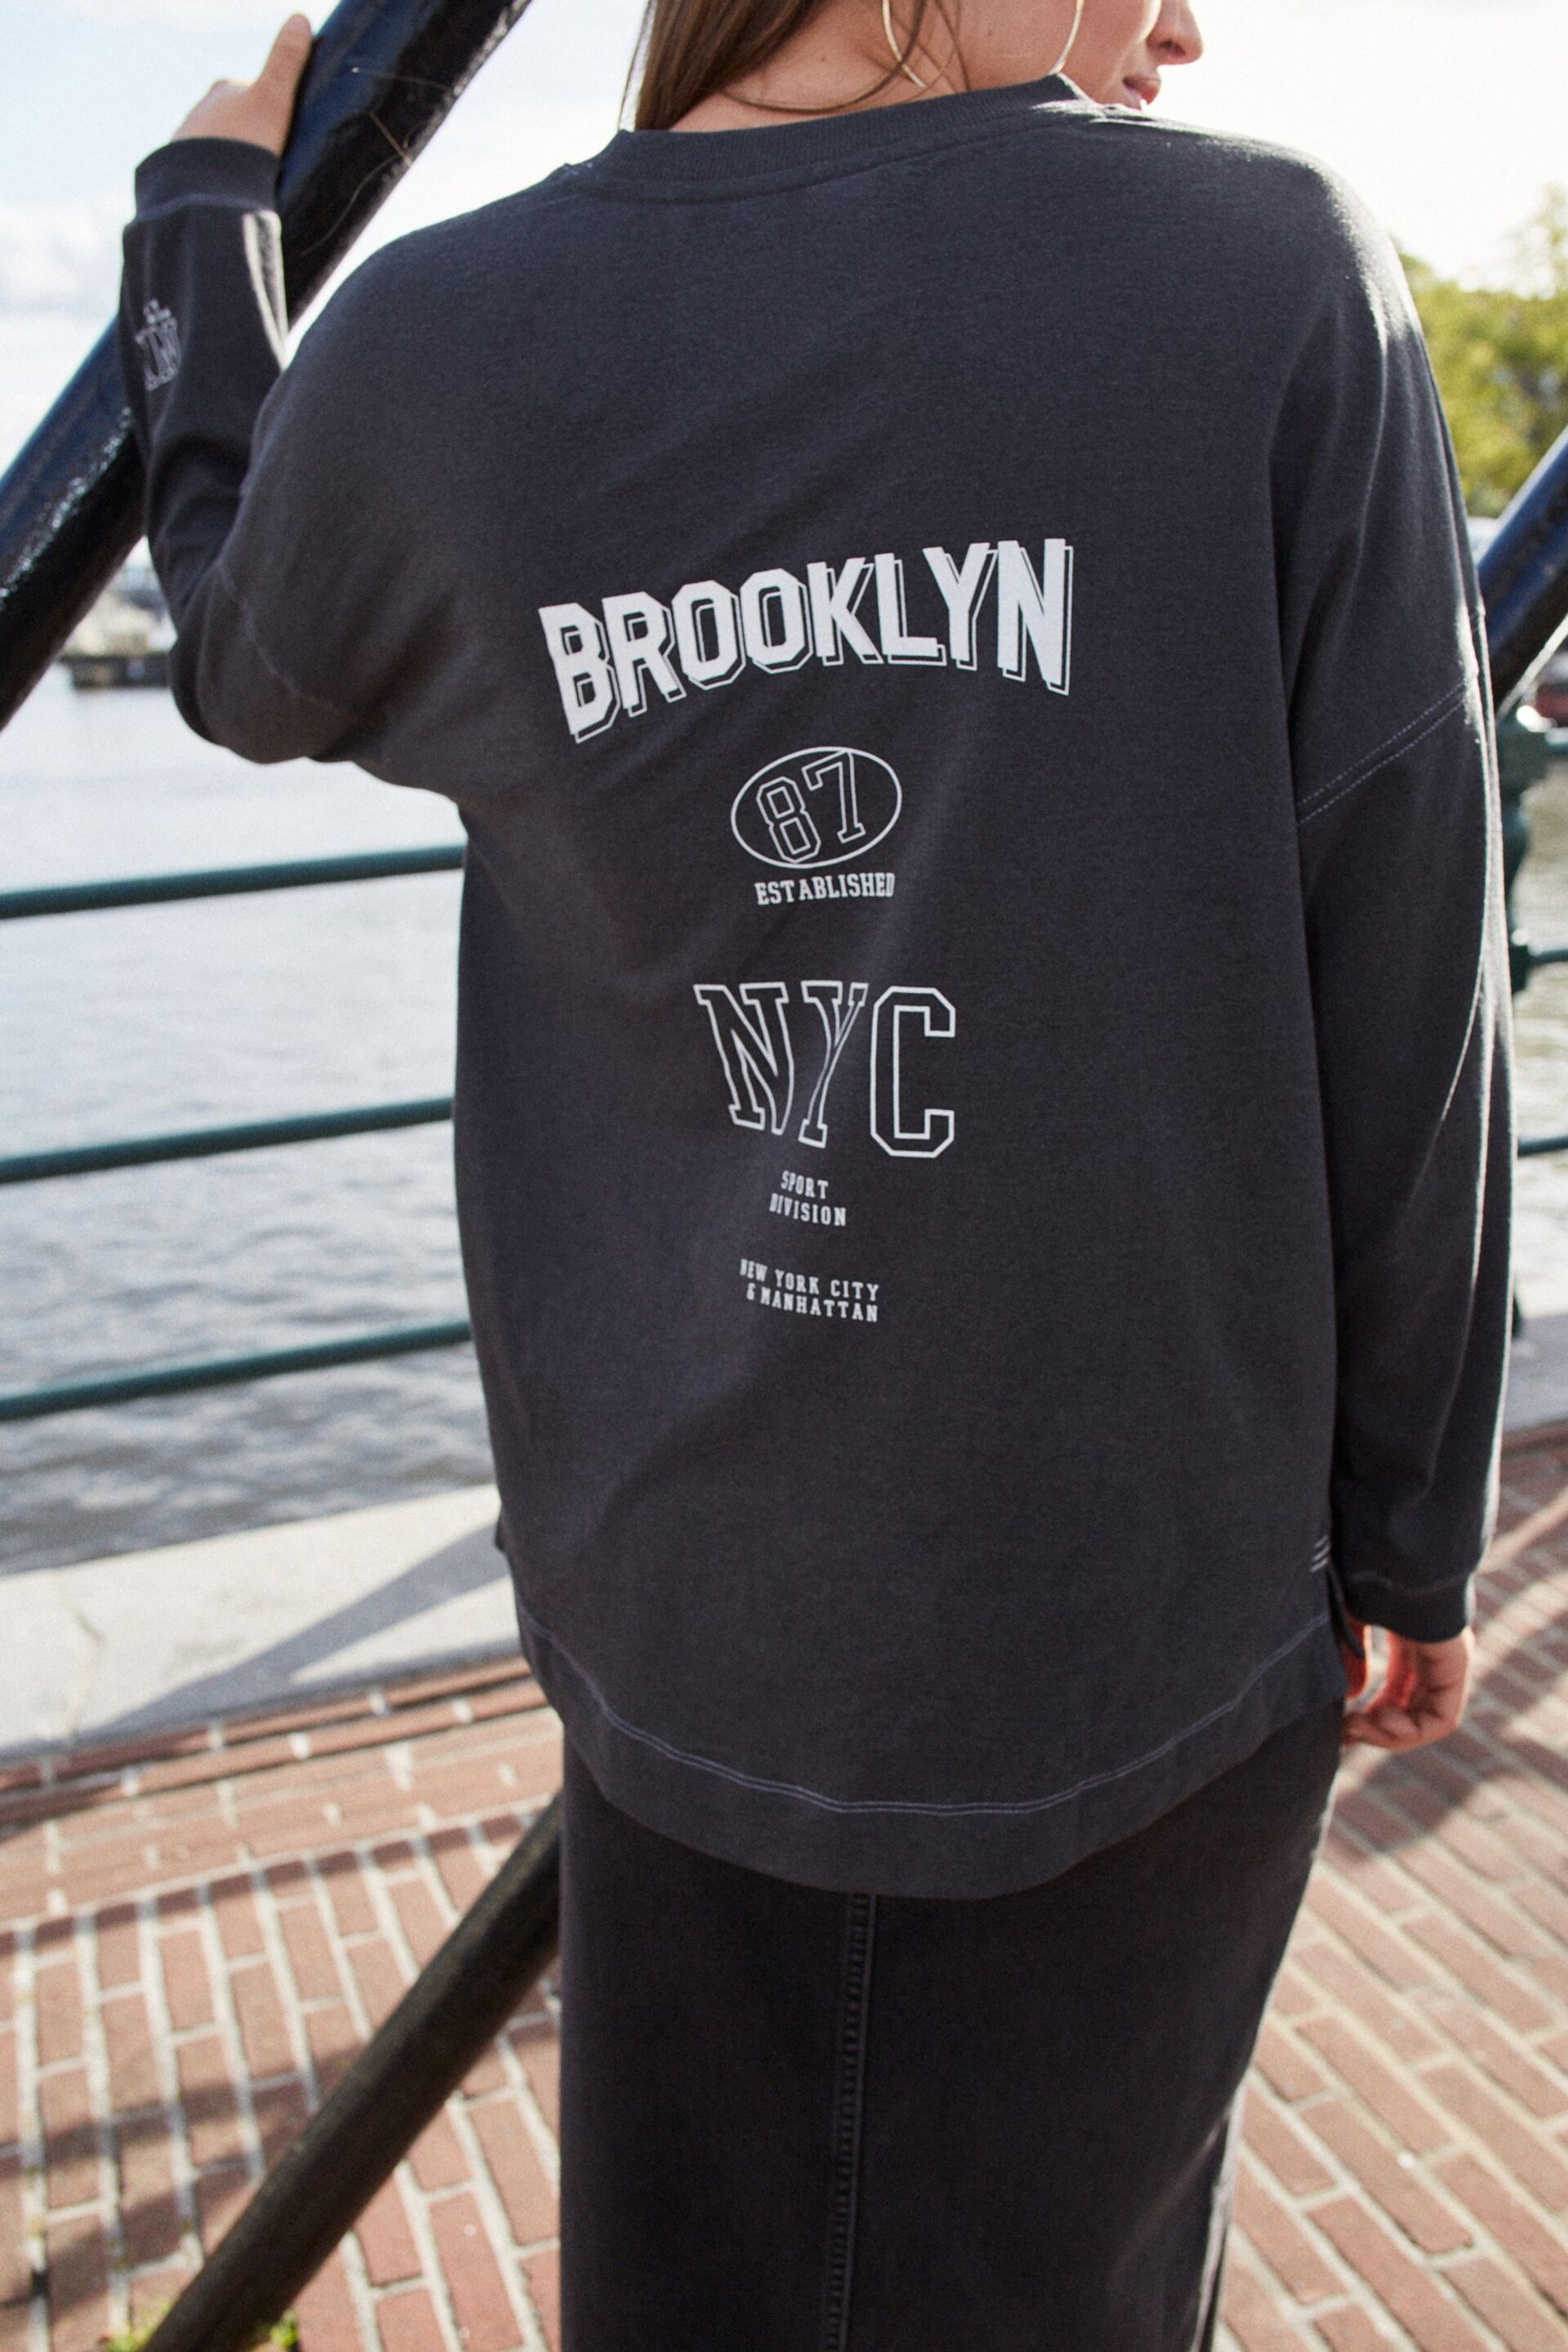 Charcoal Grey Long Sleeve Brooklyn New York City Back Graphic Top - Image 4 of 5